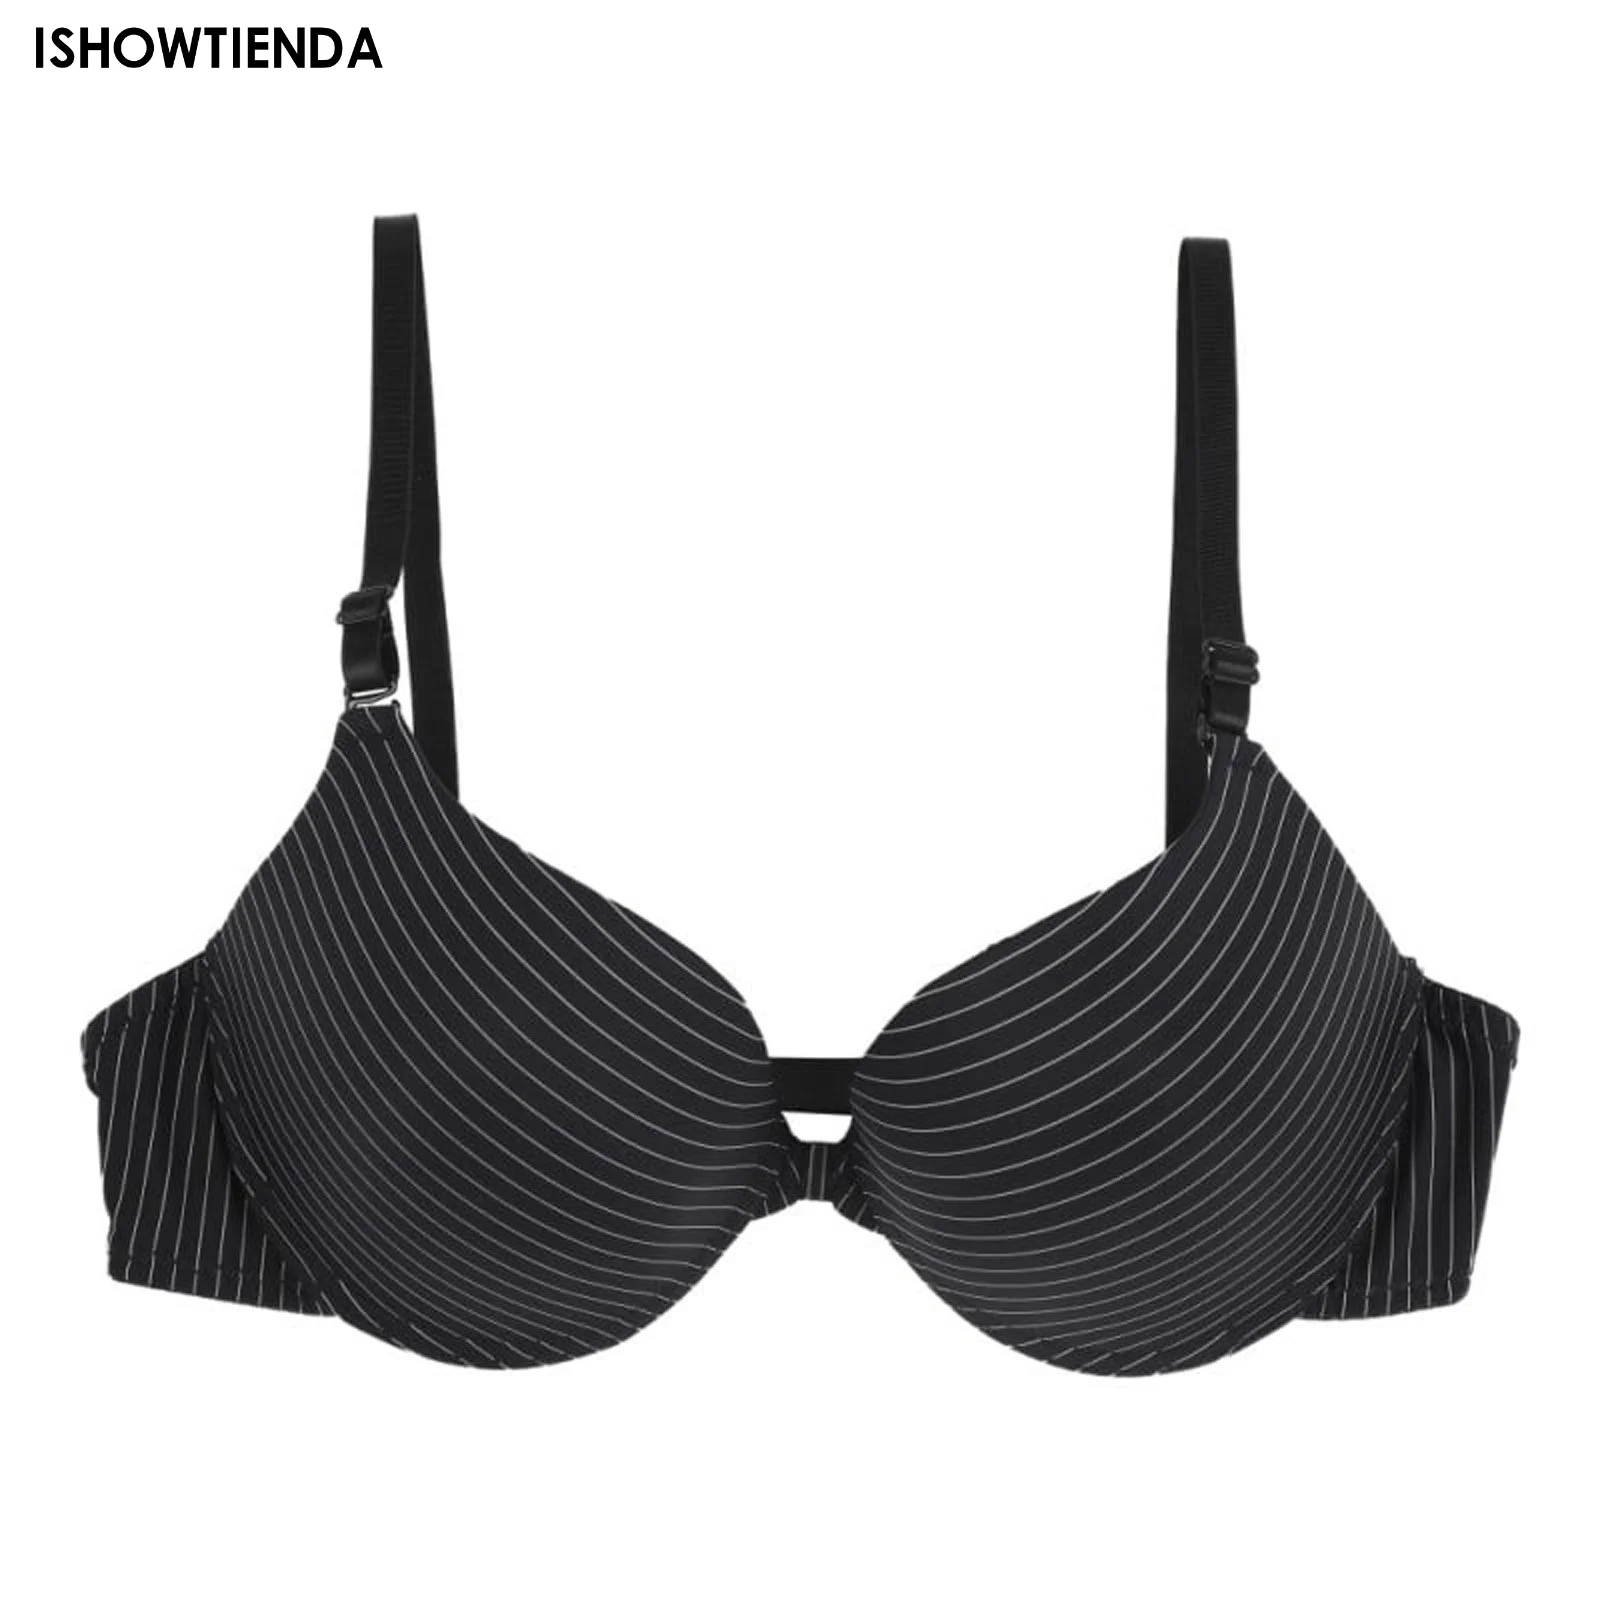 

New Sexy Front Buckle Seamless Bra For Women Style Bralette Deep V Triangle Cup Bralet Underwear Wireless Lingerie Push Up Bras